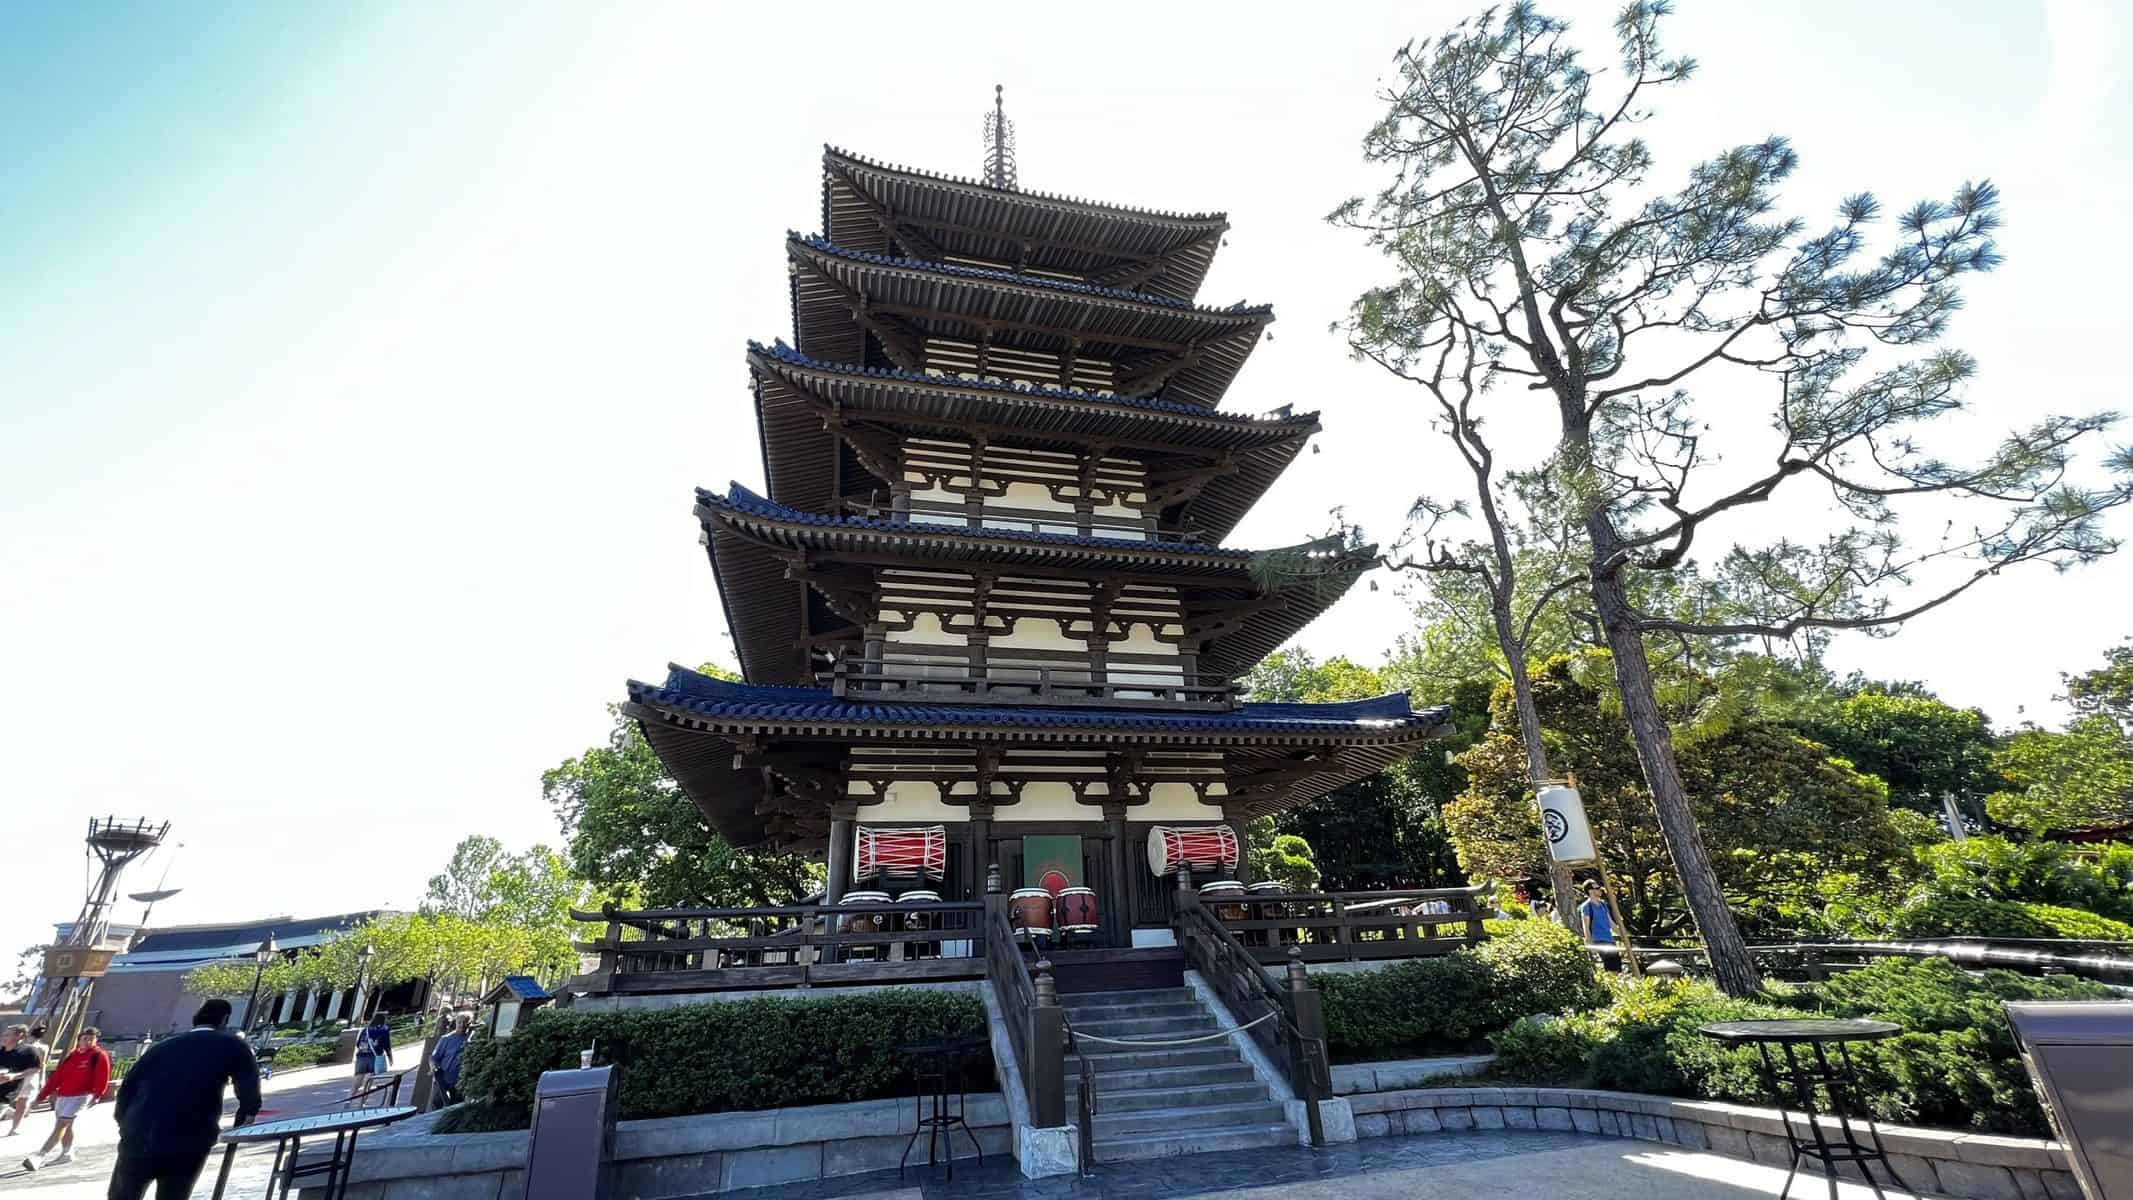 A deep dive into the Japan pavilion at Epcot (dining, shops, best fireworks views)